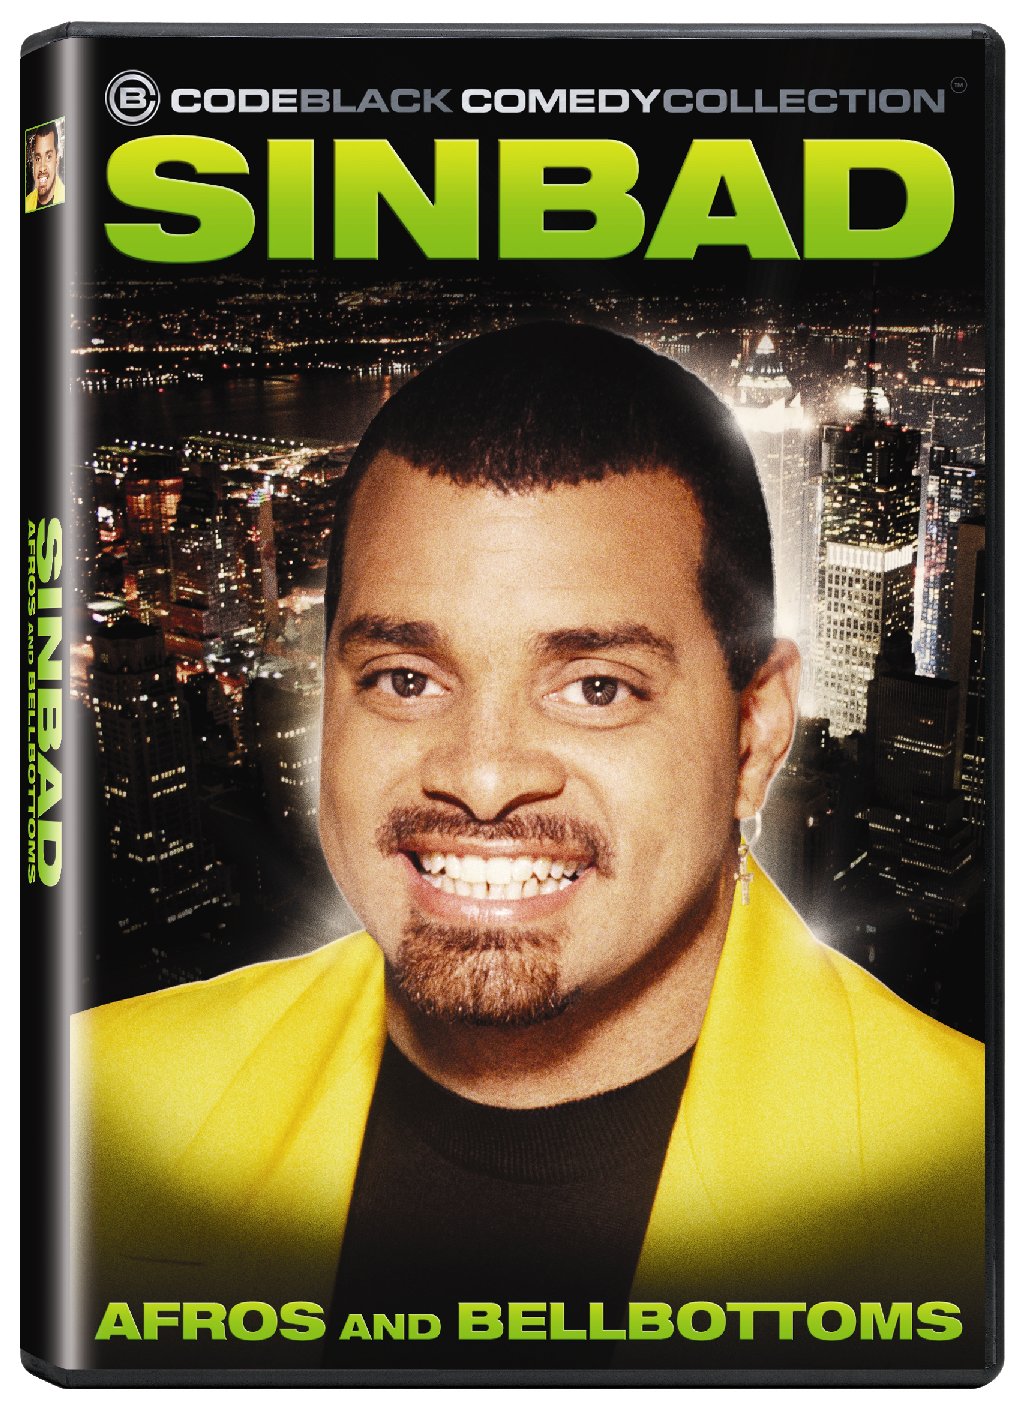 Sinbad’s Critically Acclaimed HBO Comedy Special “Afros